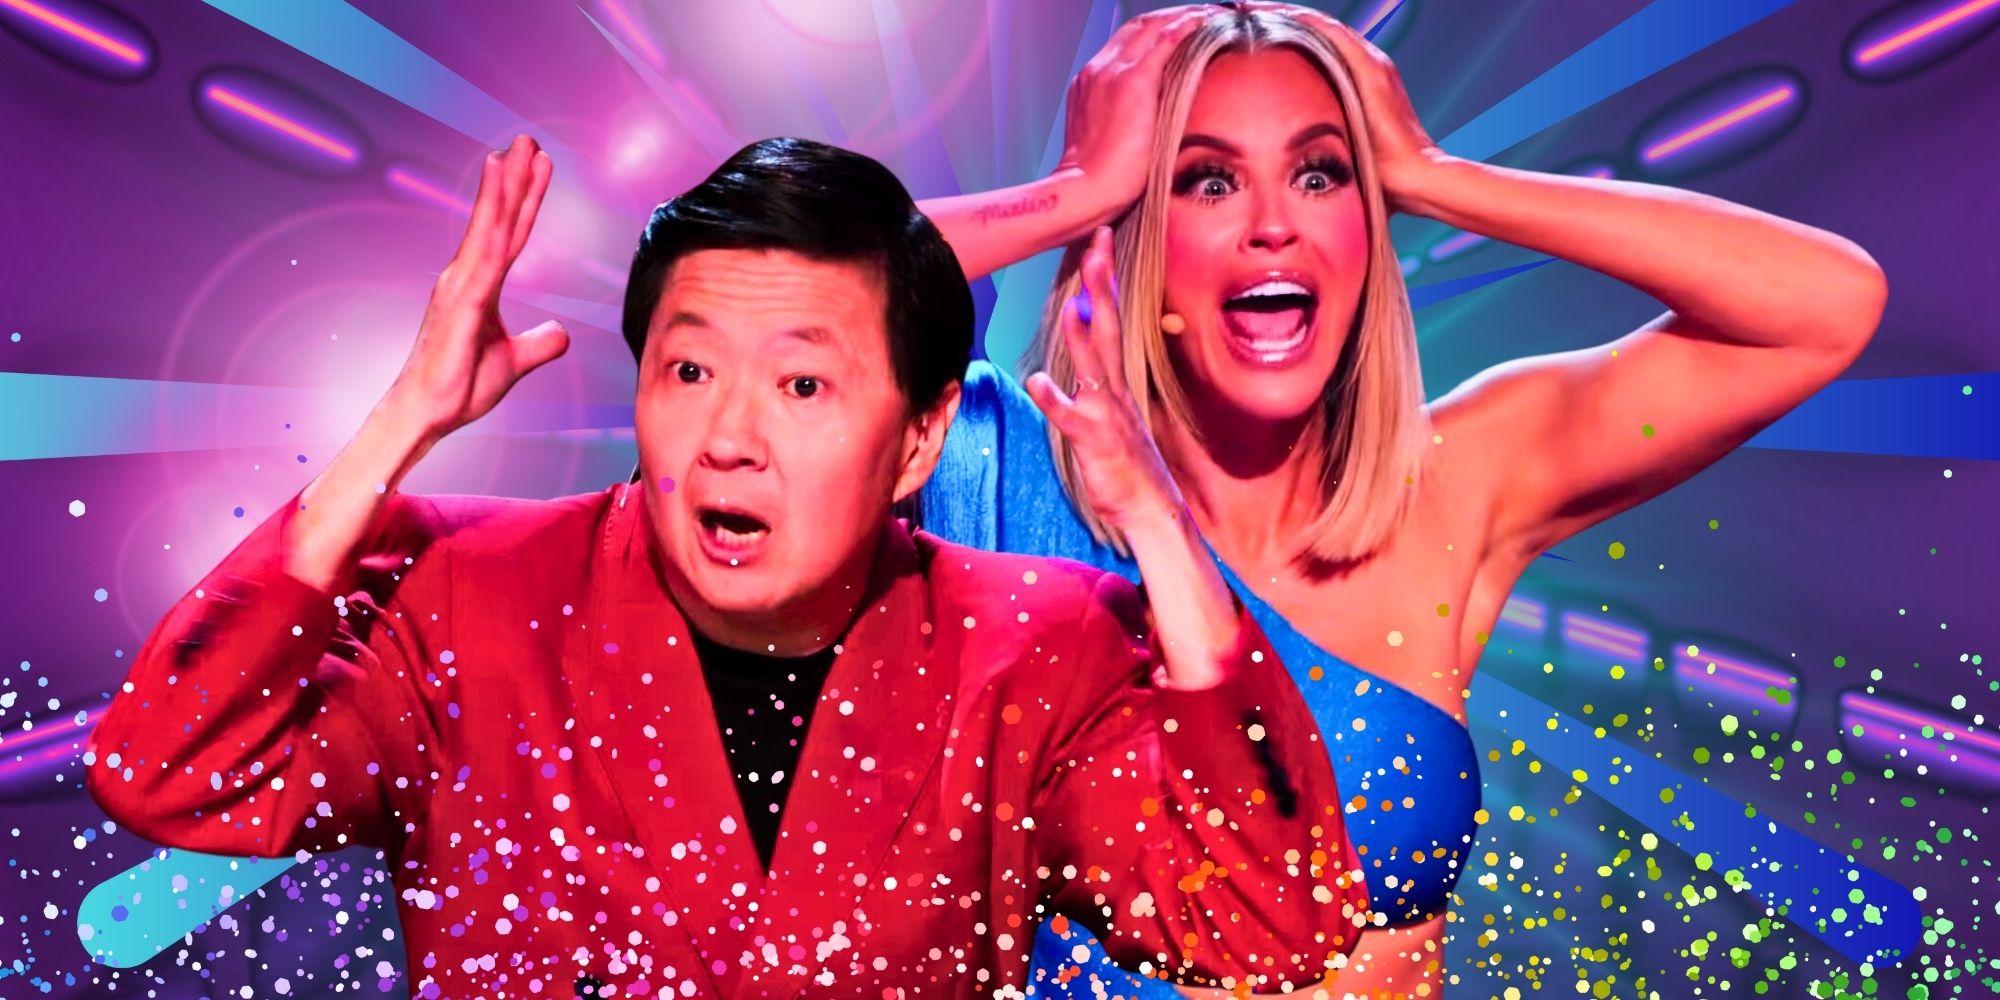 The Masked Singer's Ken Jeong and Jenny McCarthy looking shocked